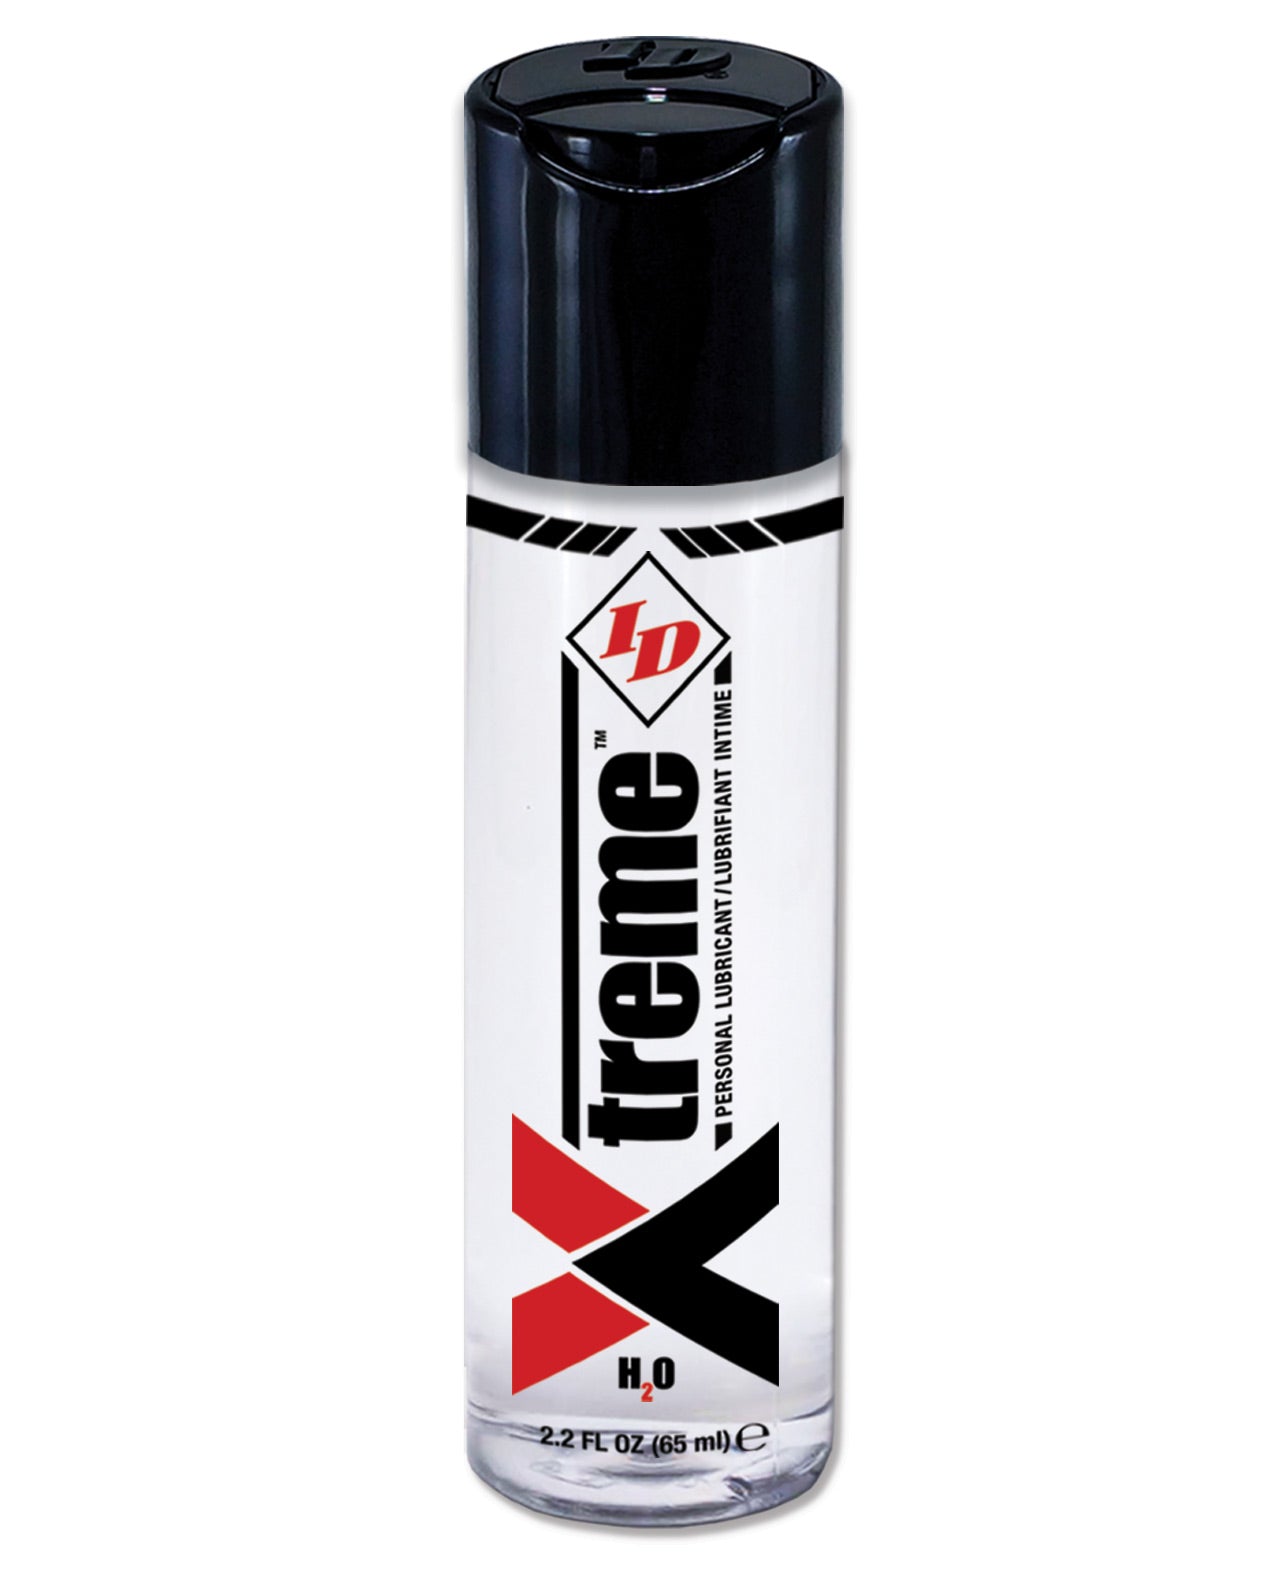 Id Xtreme Waterbased Lubricant - 2.2 Oz Bottle - LUST Depot